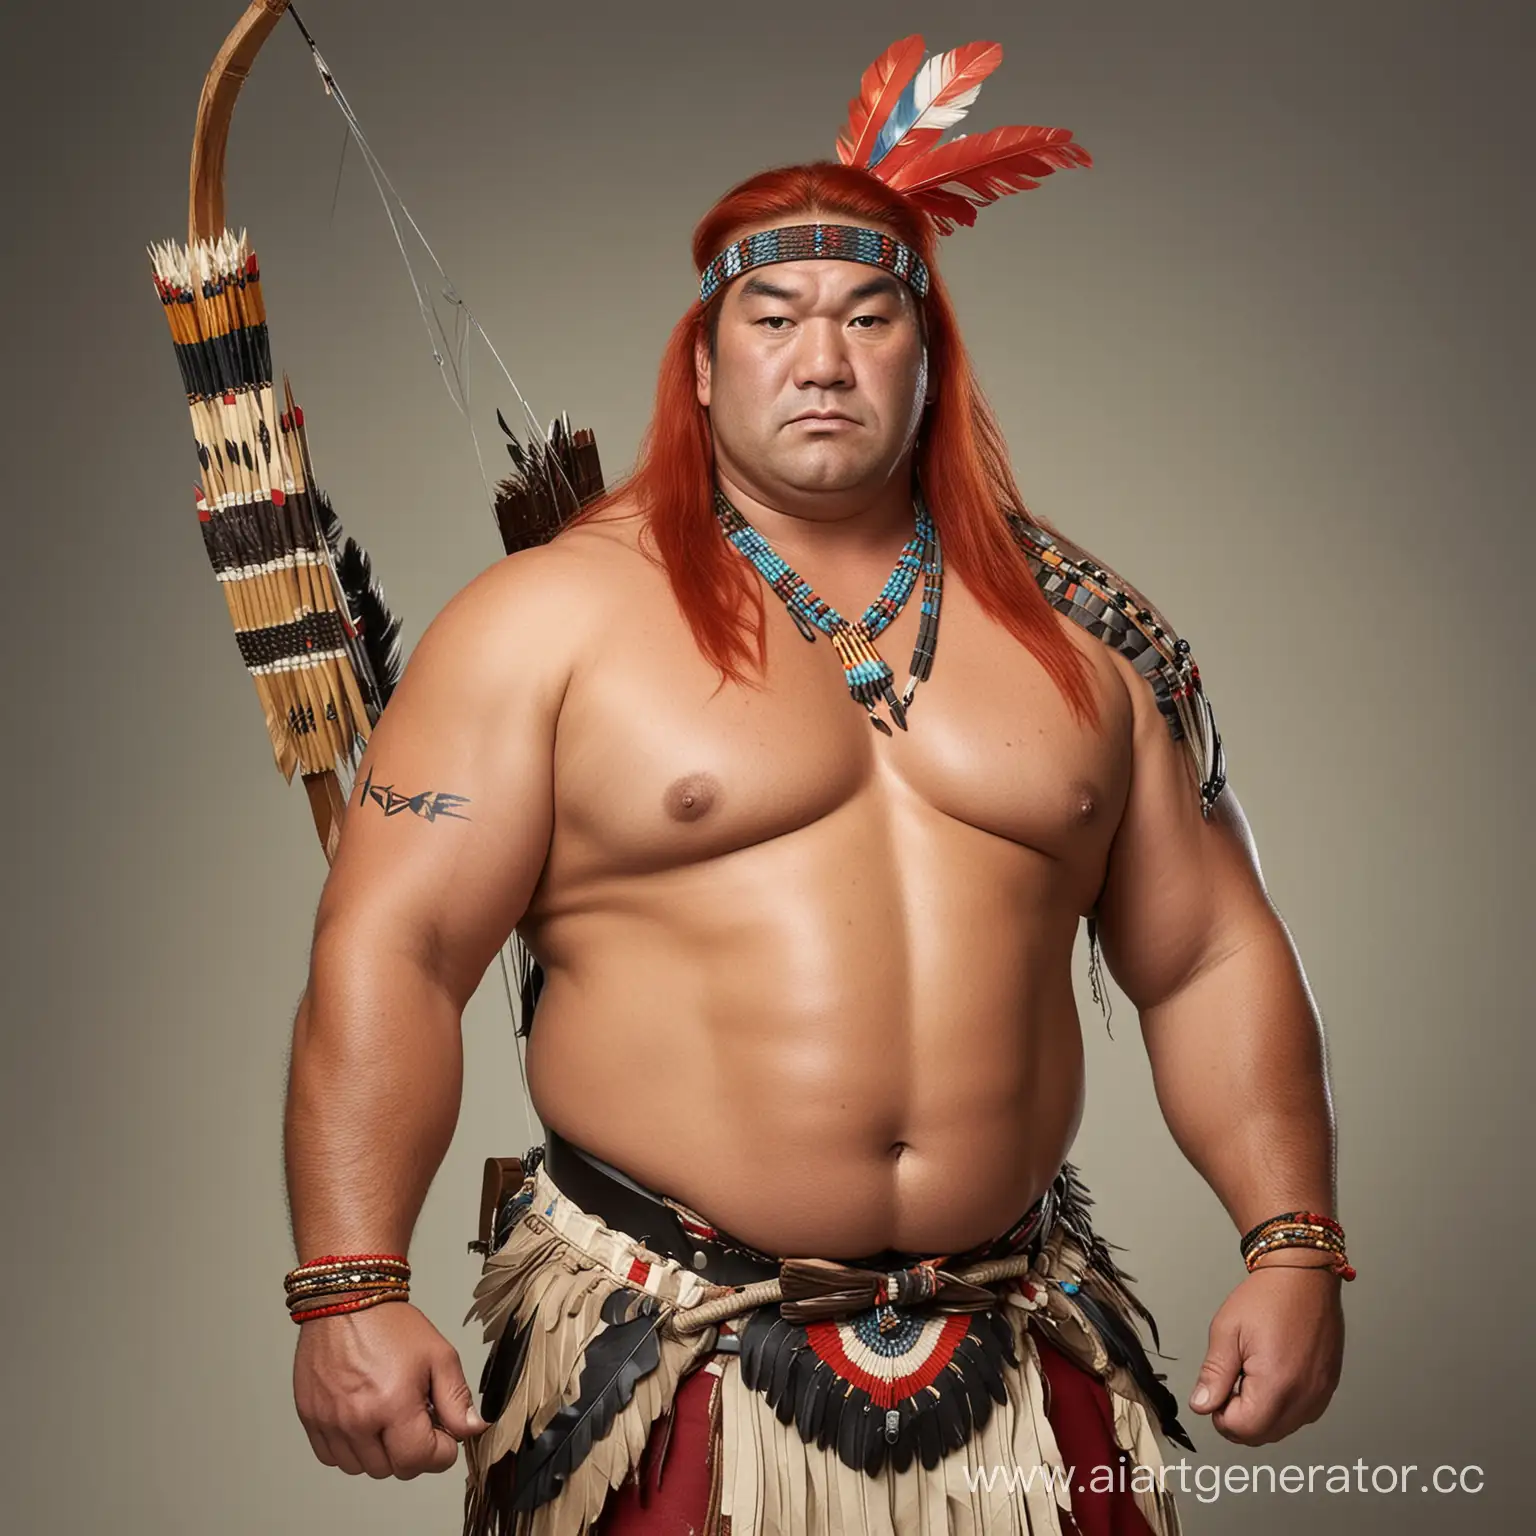 Sumo-Wrestler-with-Long-Red-Hair-Poses-as-Native-American-Warrior-with-Bow-and-Arrow